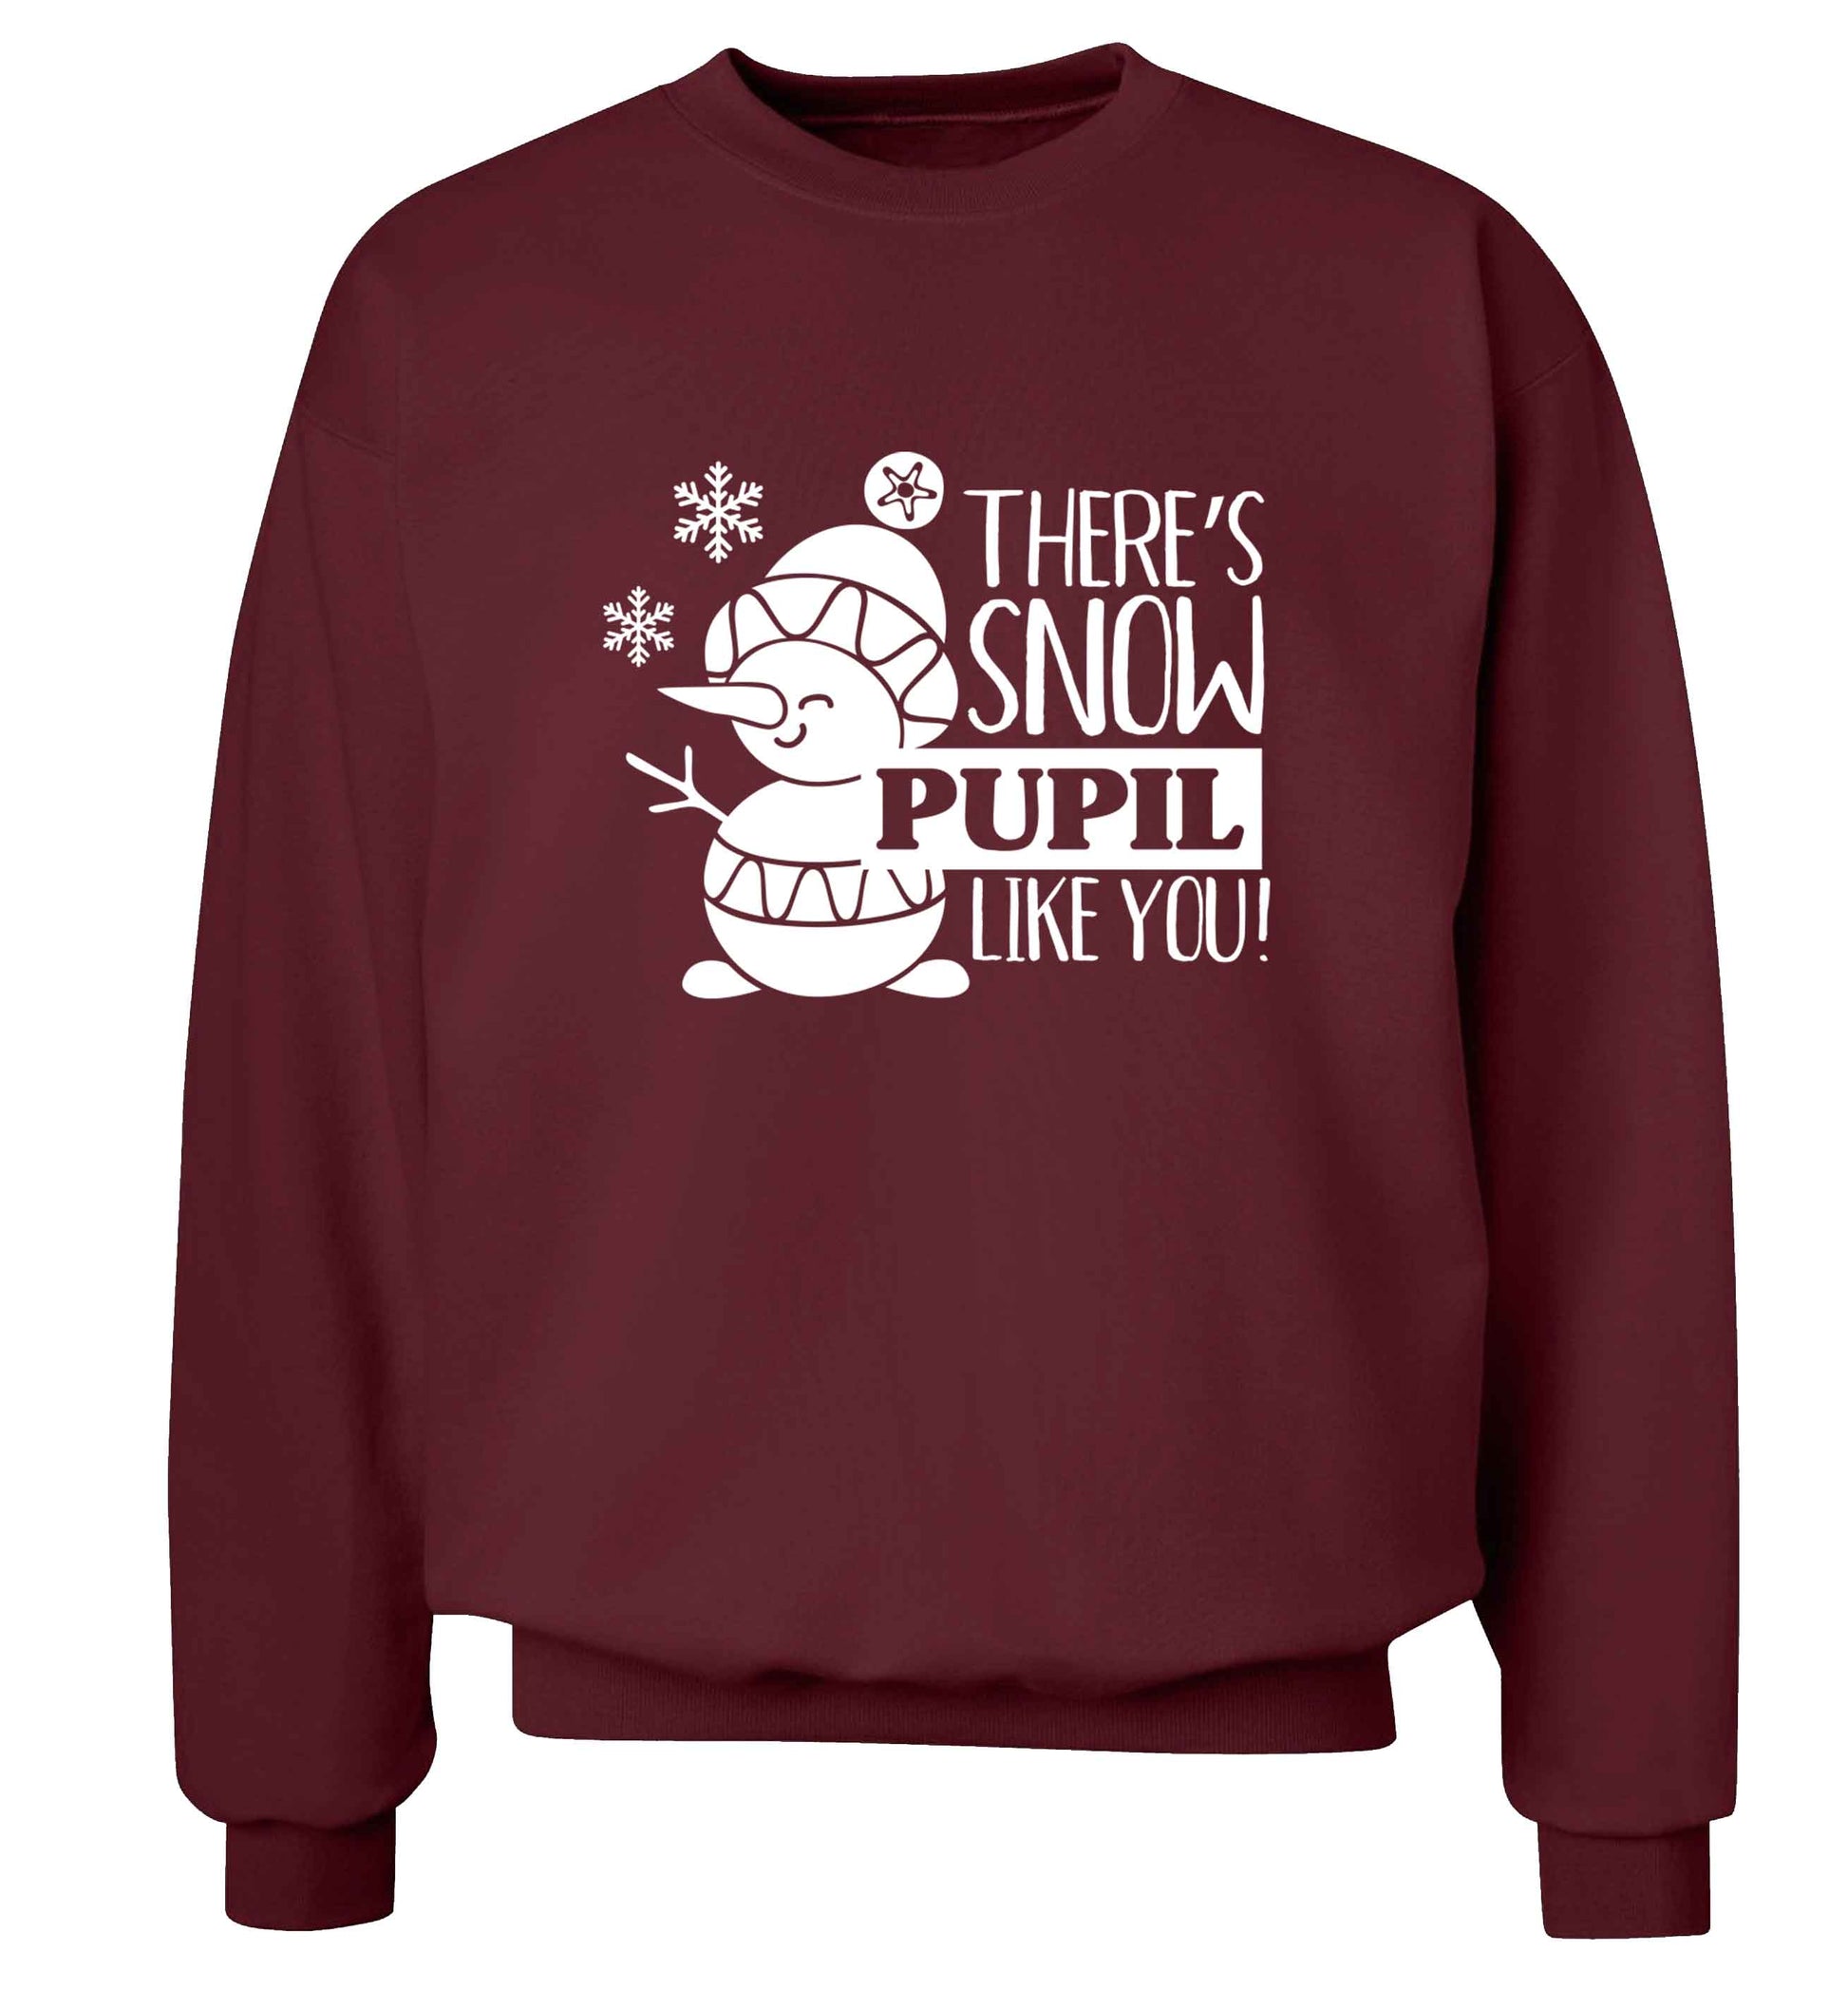 There's snow pupil like you adult's unisex maroon sweater 2XL